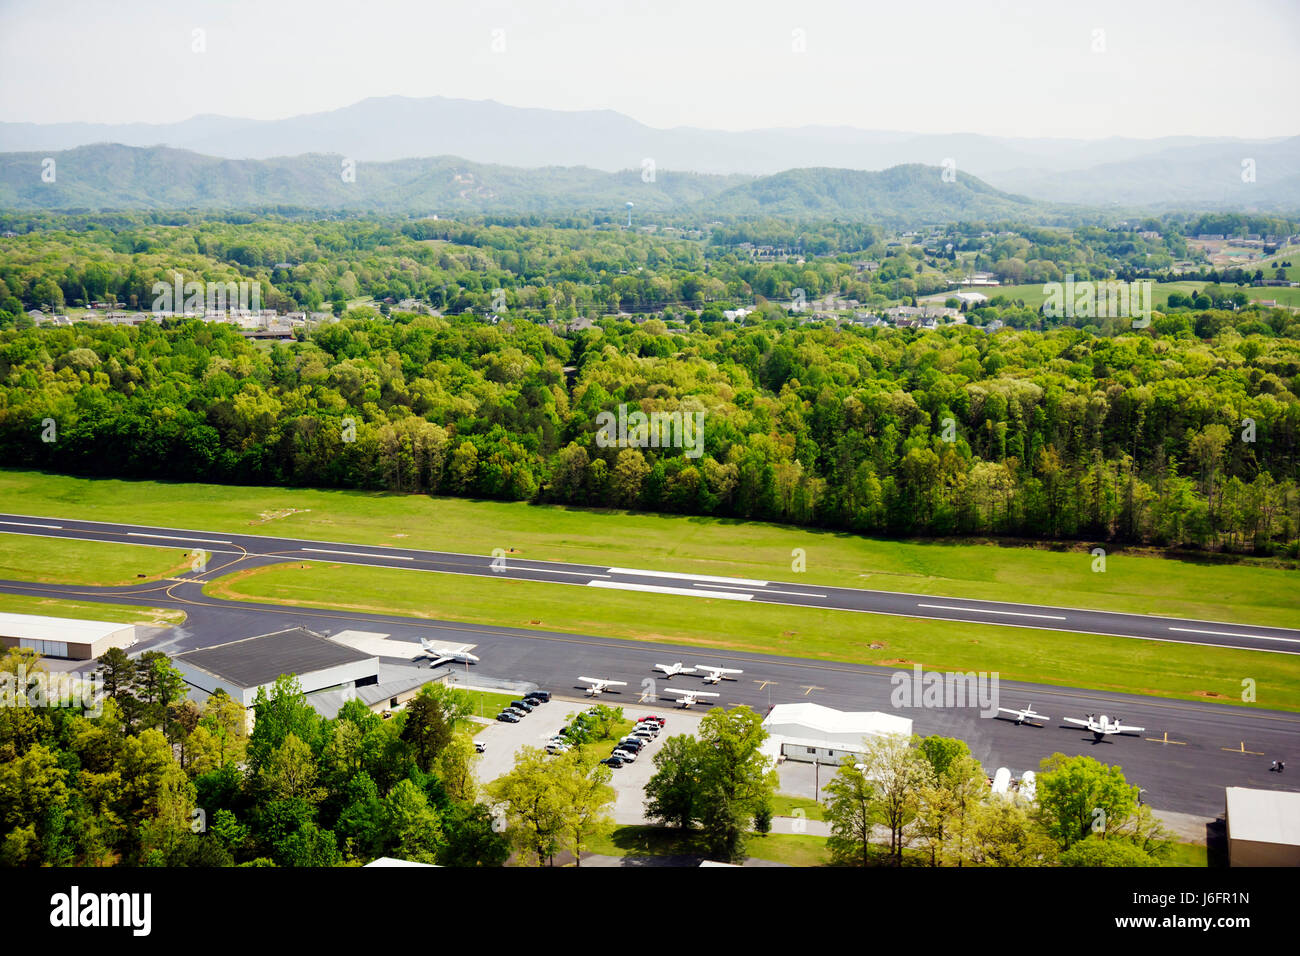 Sevierville Tennessee,Smoky Mountains,Gatlinburg Pigeon Forge Airport,aerial overhead view from above,runway,TN080501051 Stock Photo